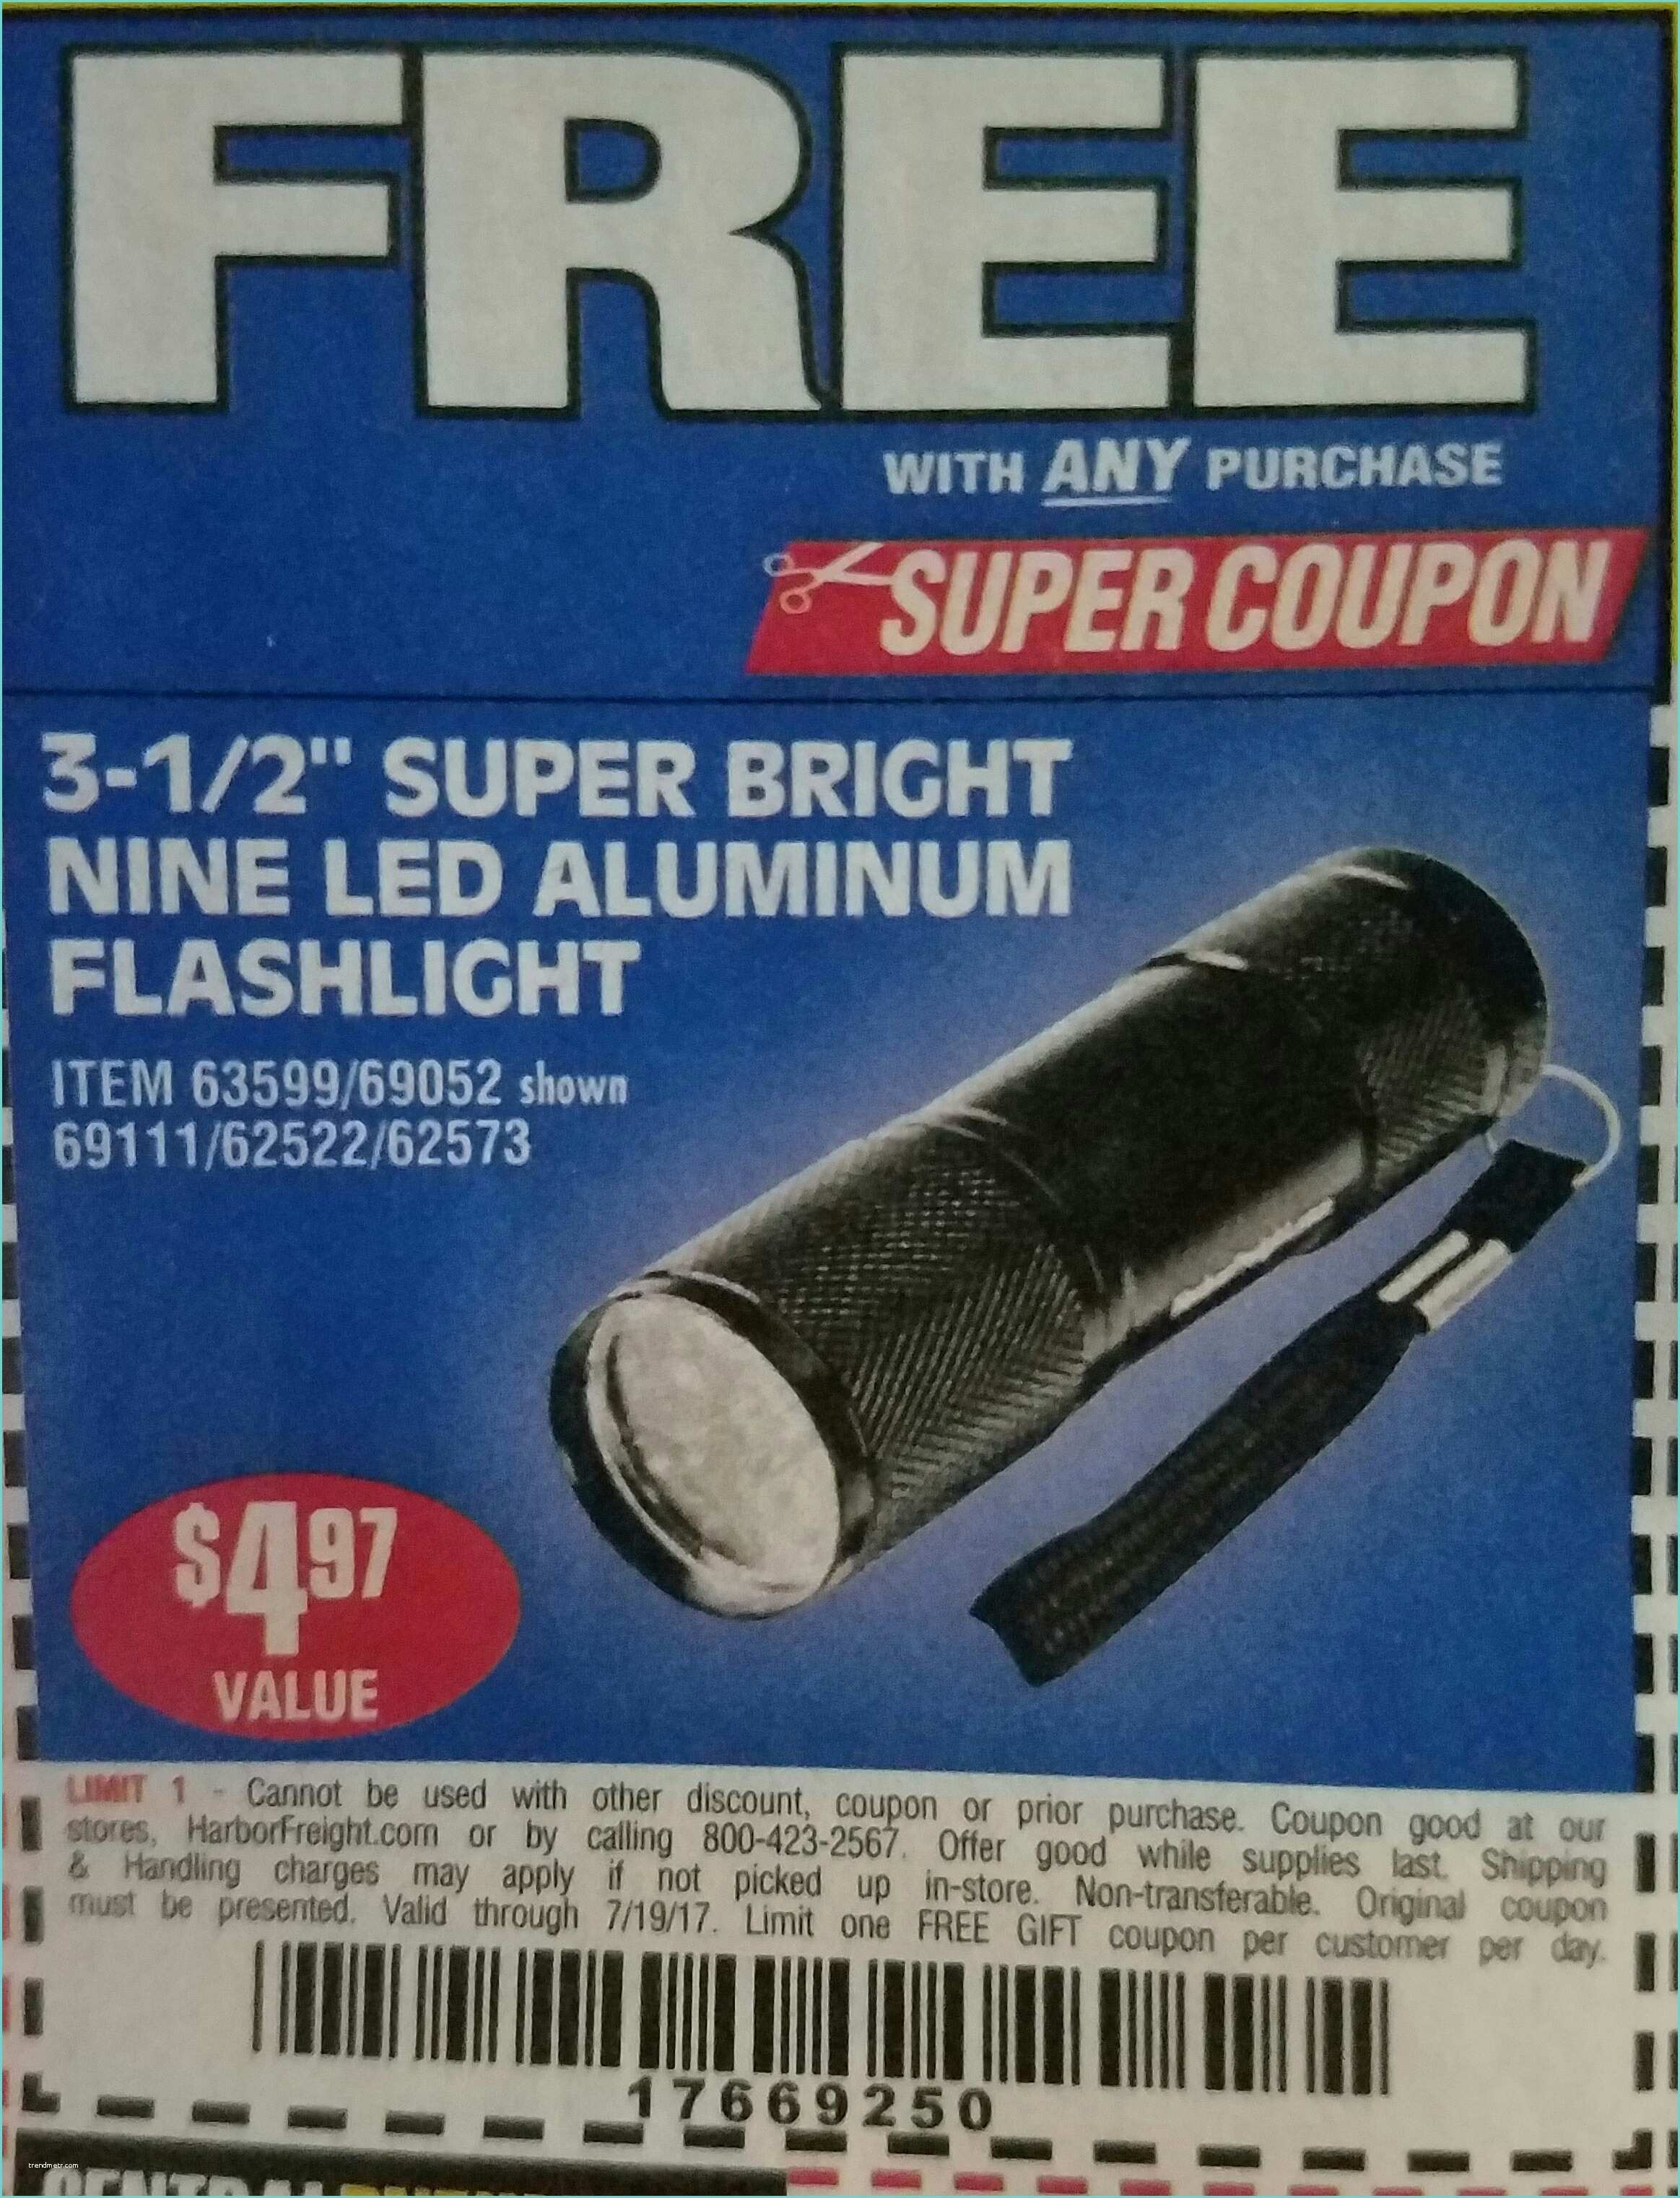 Super Bright Leds Coupon Harbor Freight Coupons & Promo Codes 2017 Couponshy